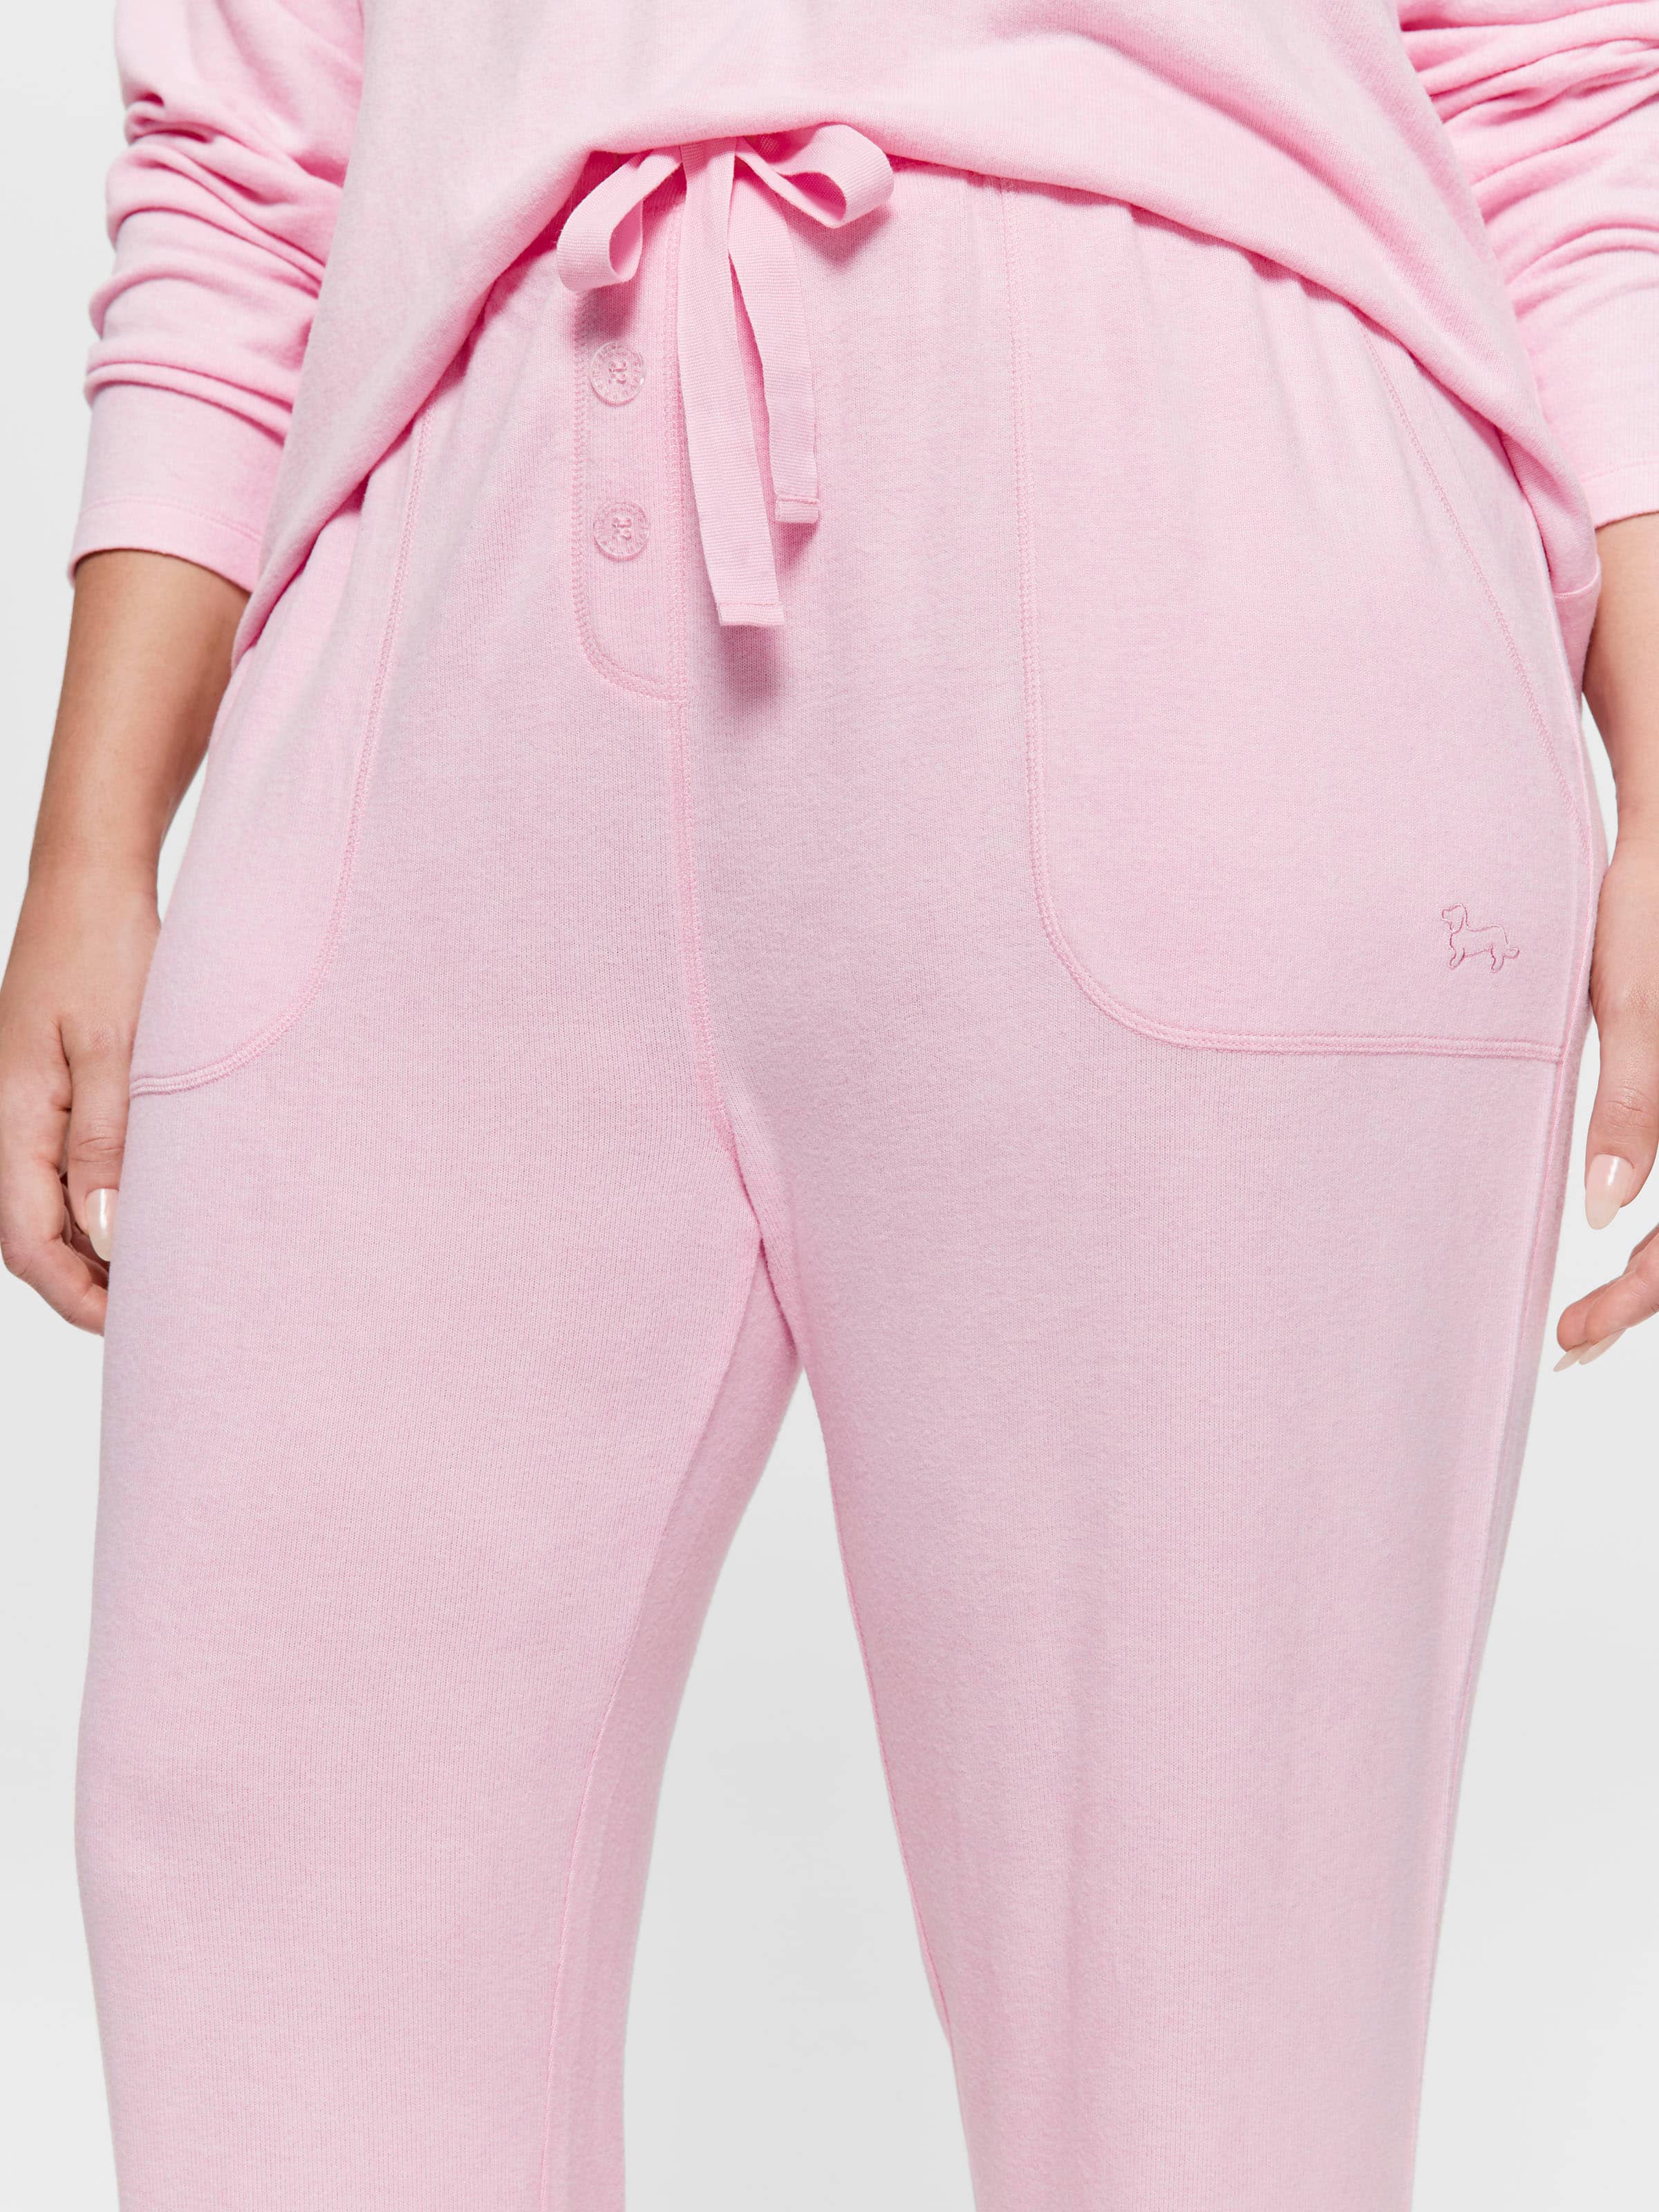 P.A. Plus Pink Marle Fuzzy Easy Pj Pant